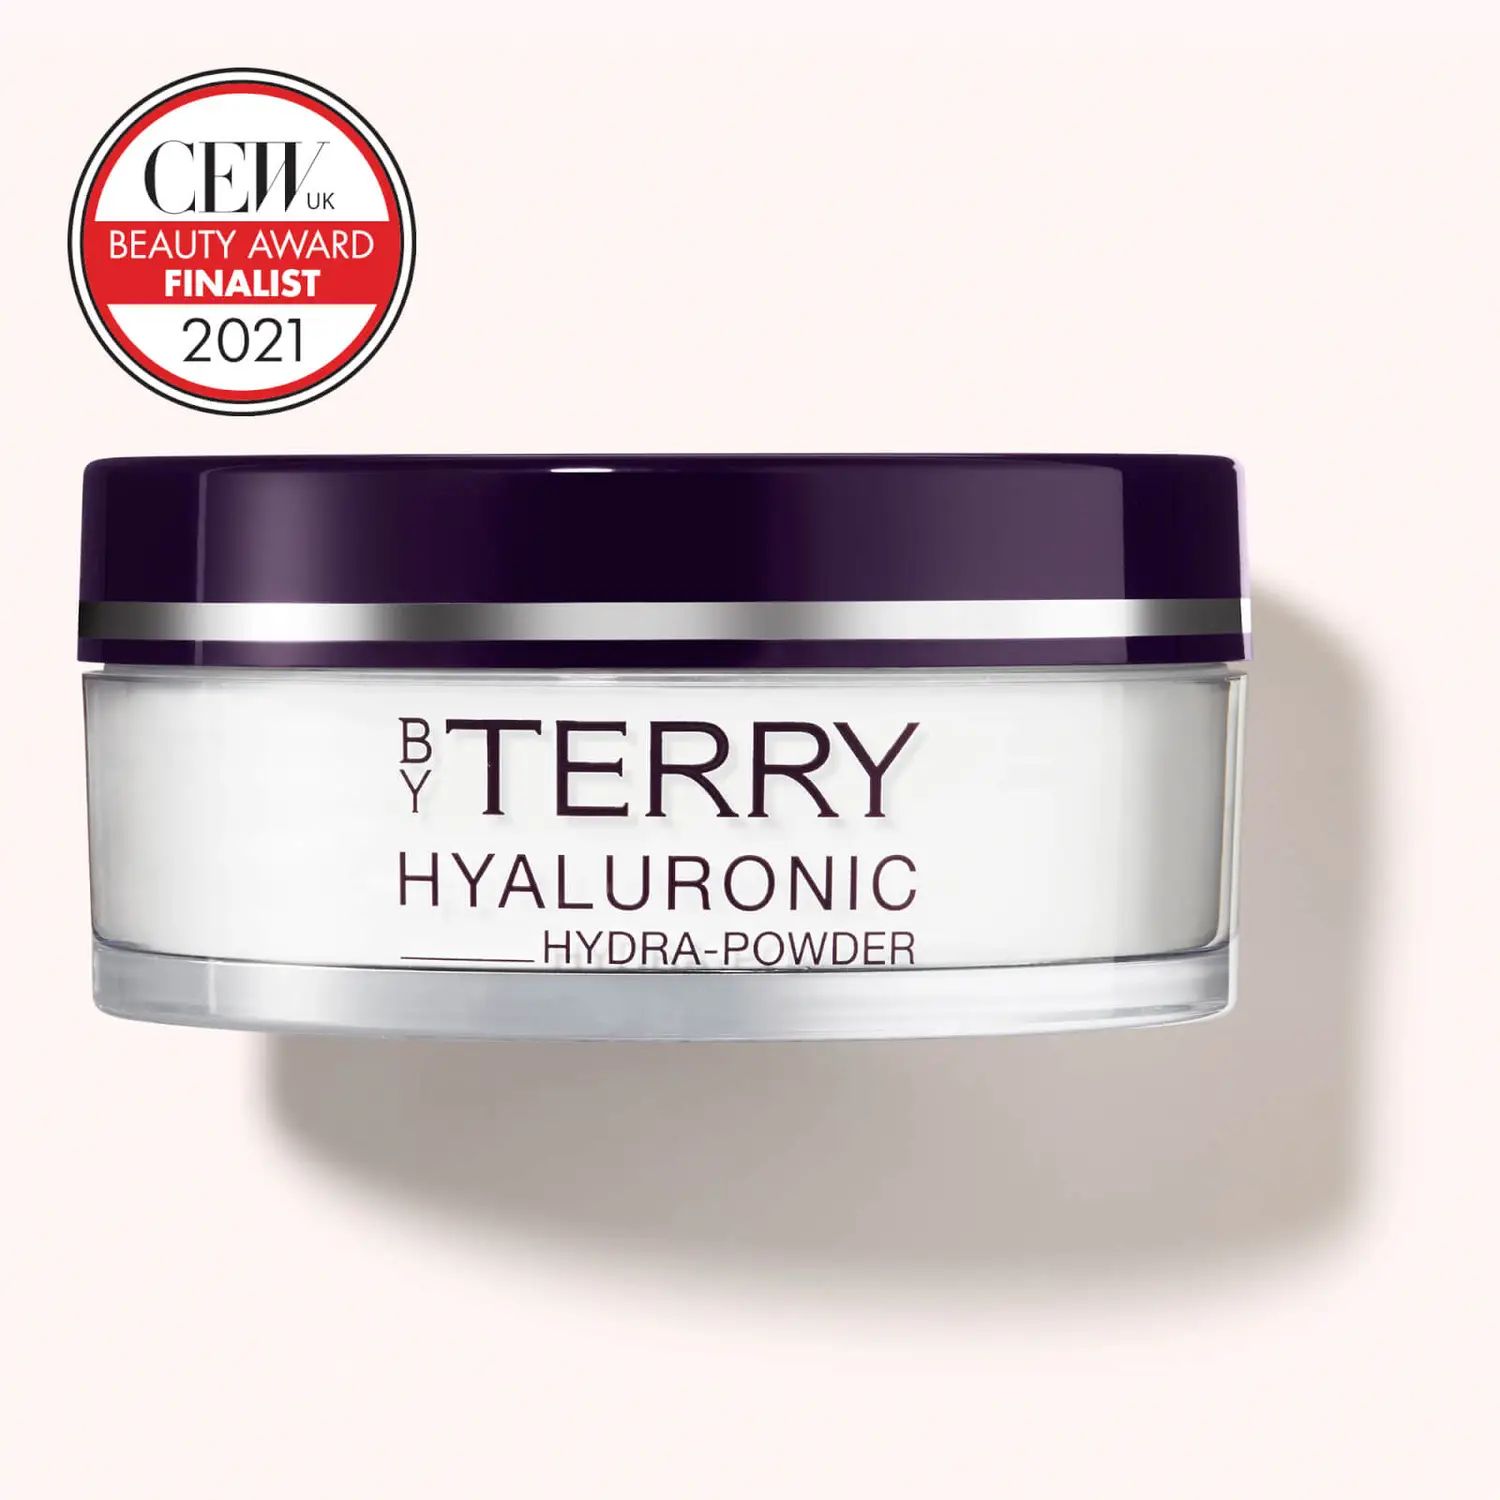 By Terry Hyaluronic Hydra-Powder (10 g.) | Dermstore (US)